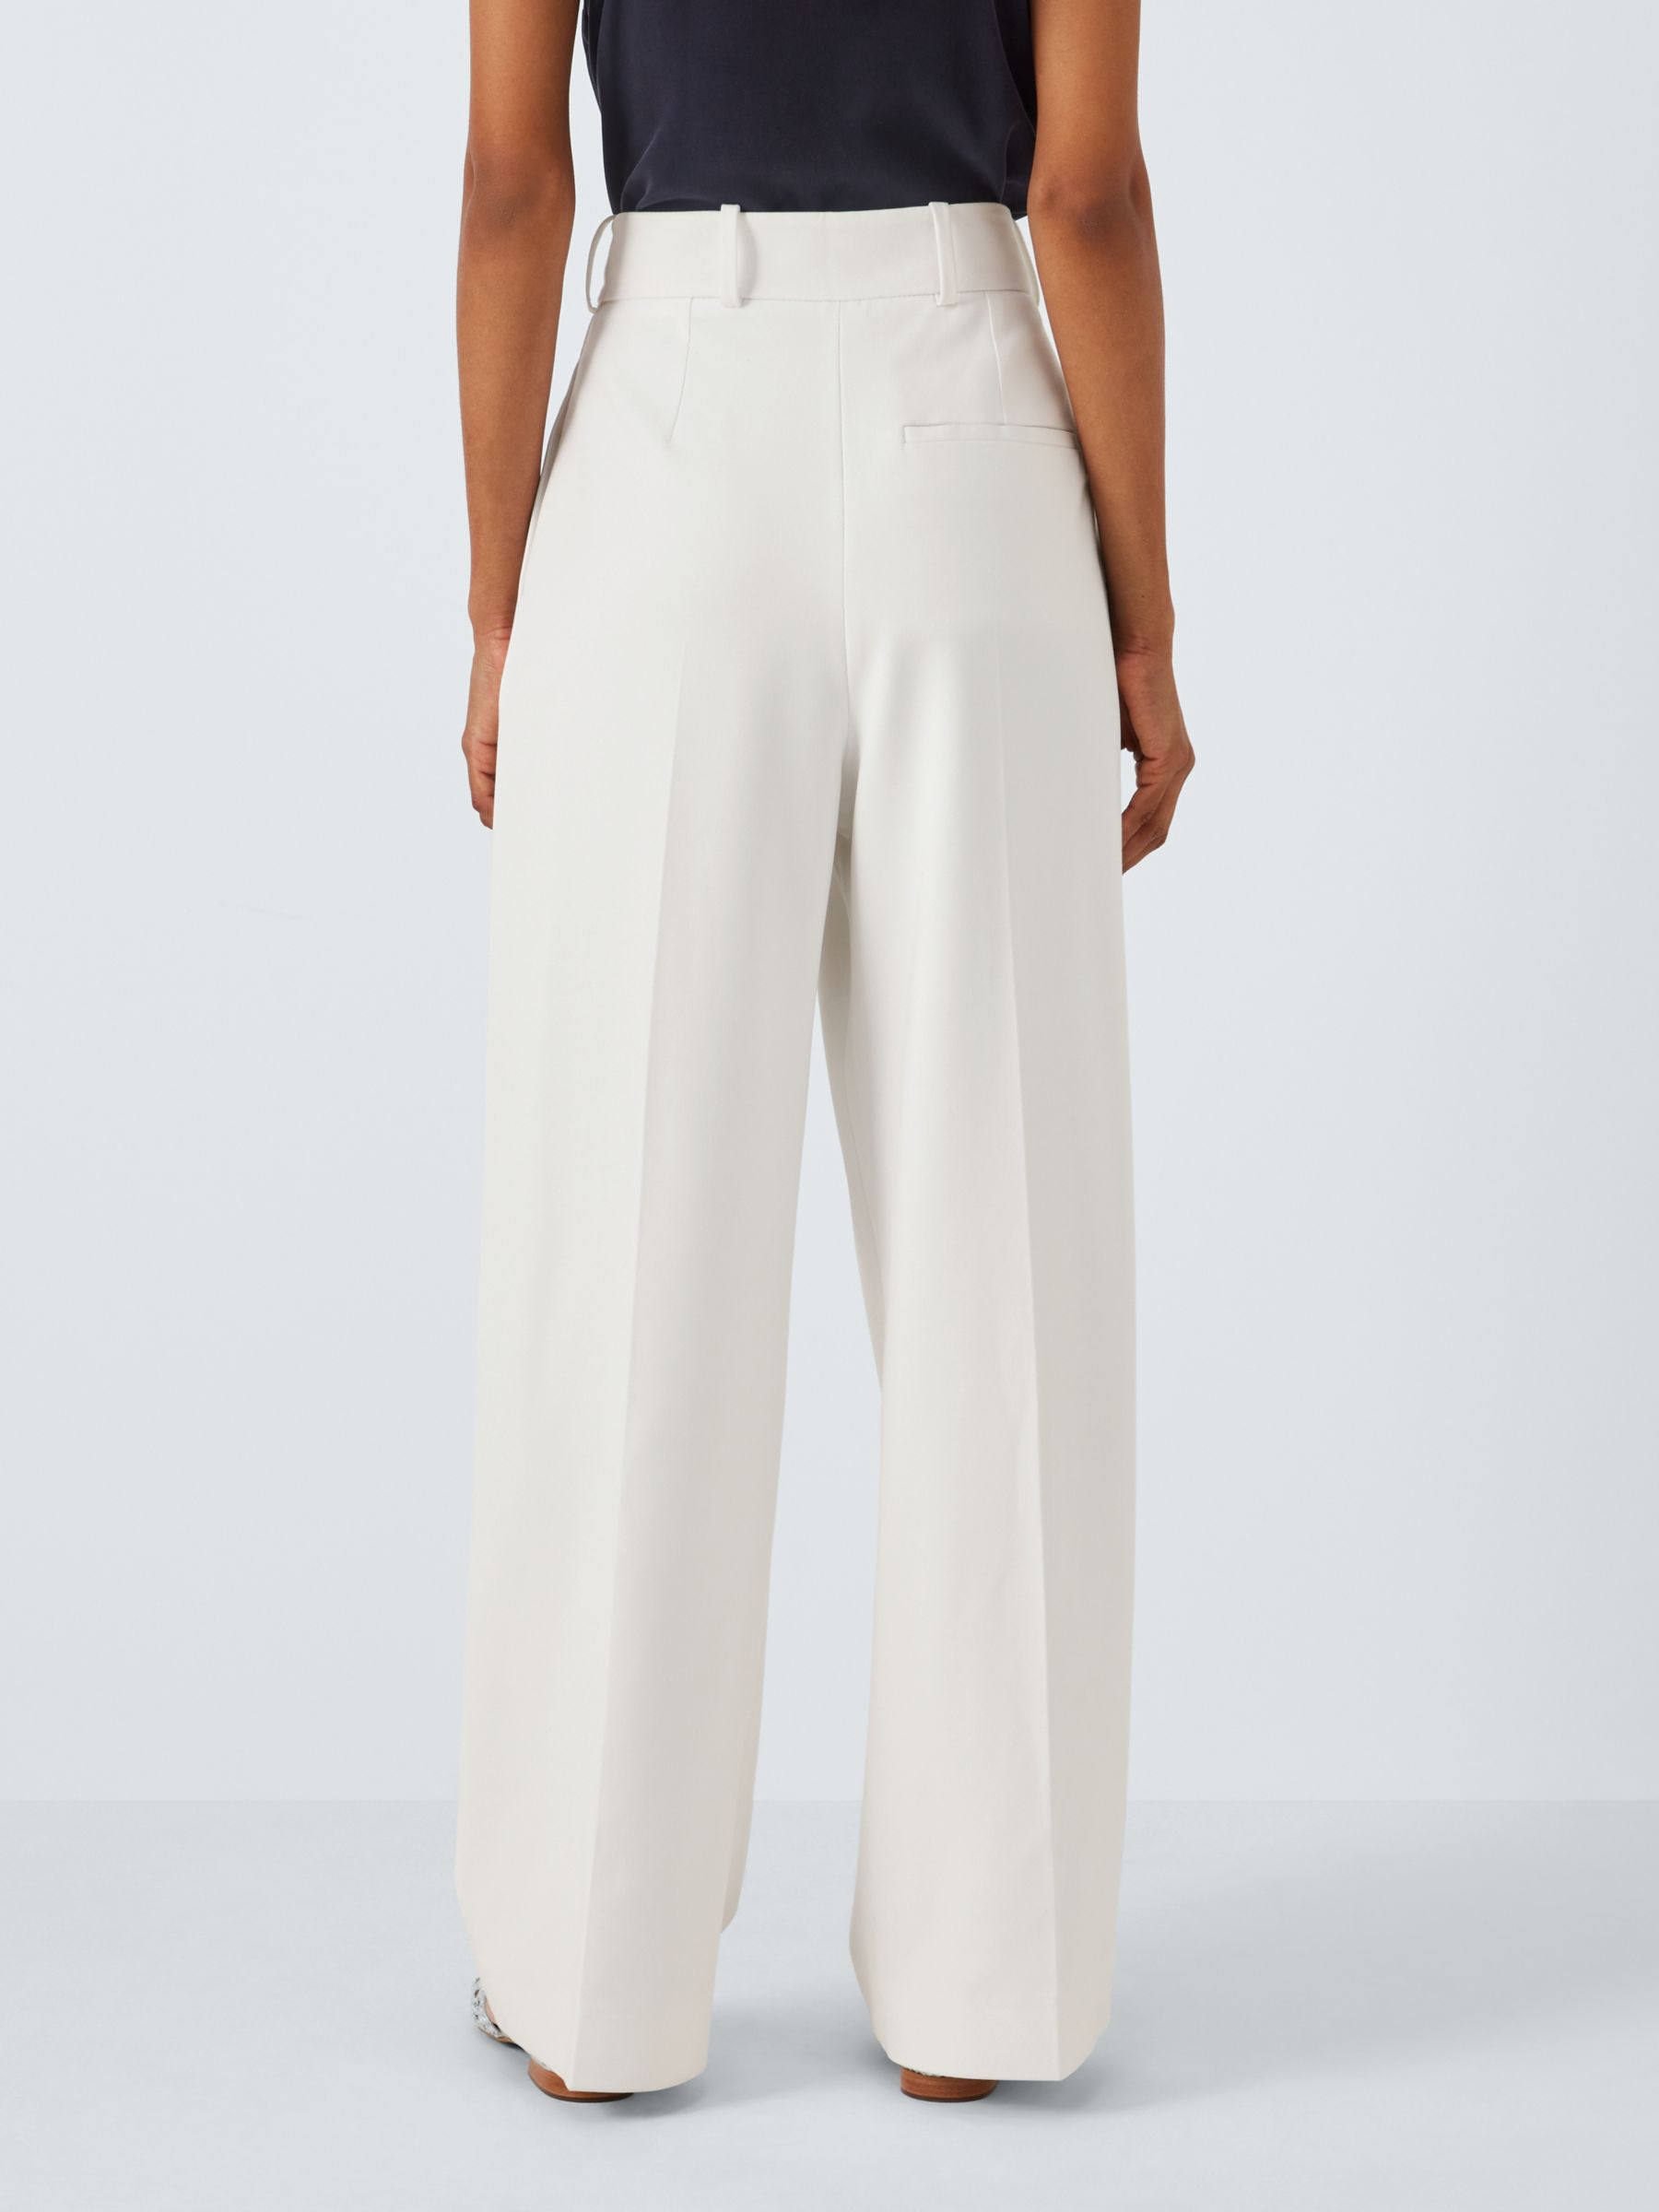 Buy John Lewis High Waisted Wide Leg Trousers Online at johnlewis.com